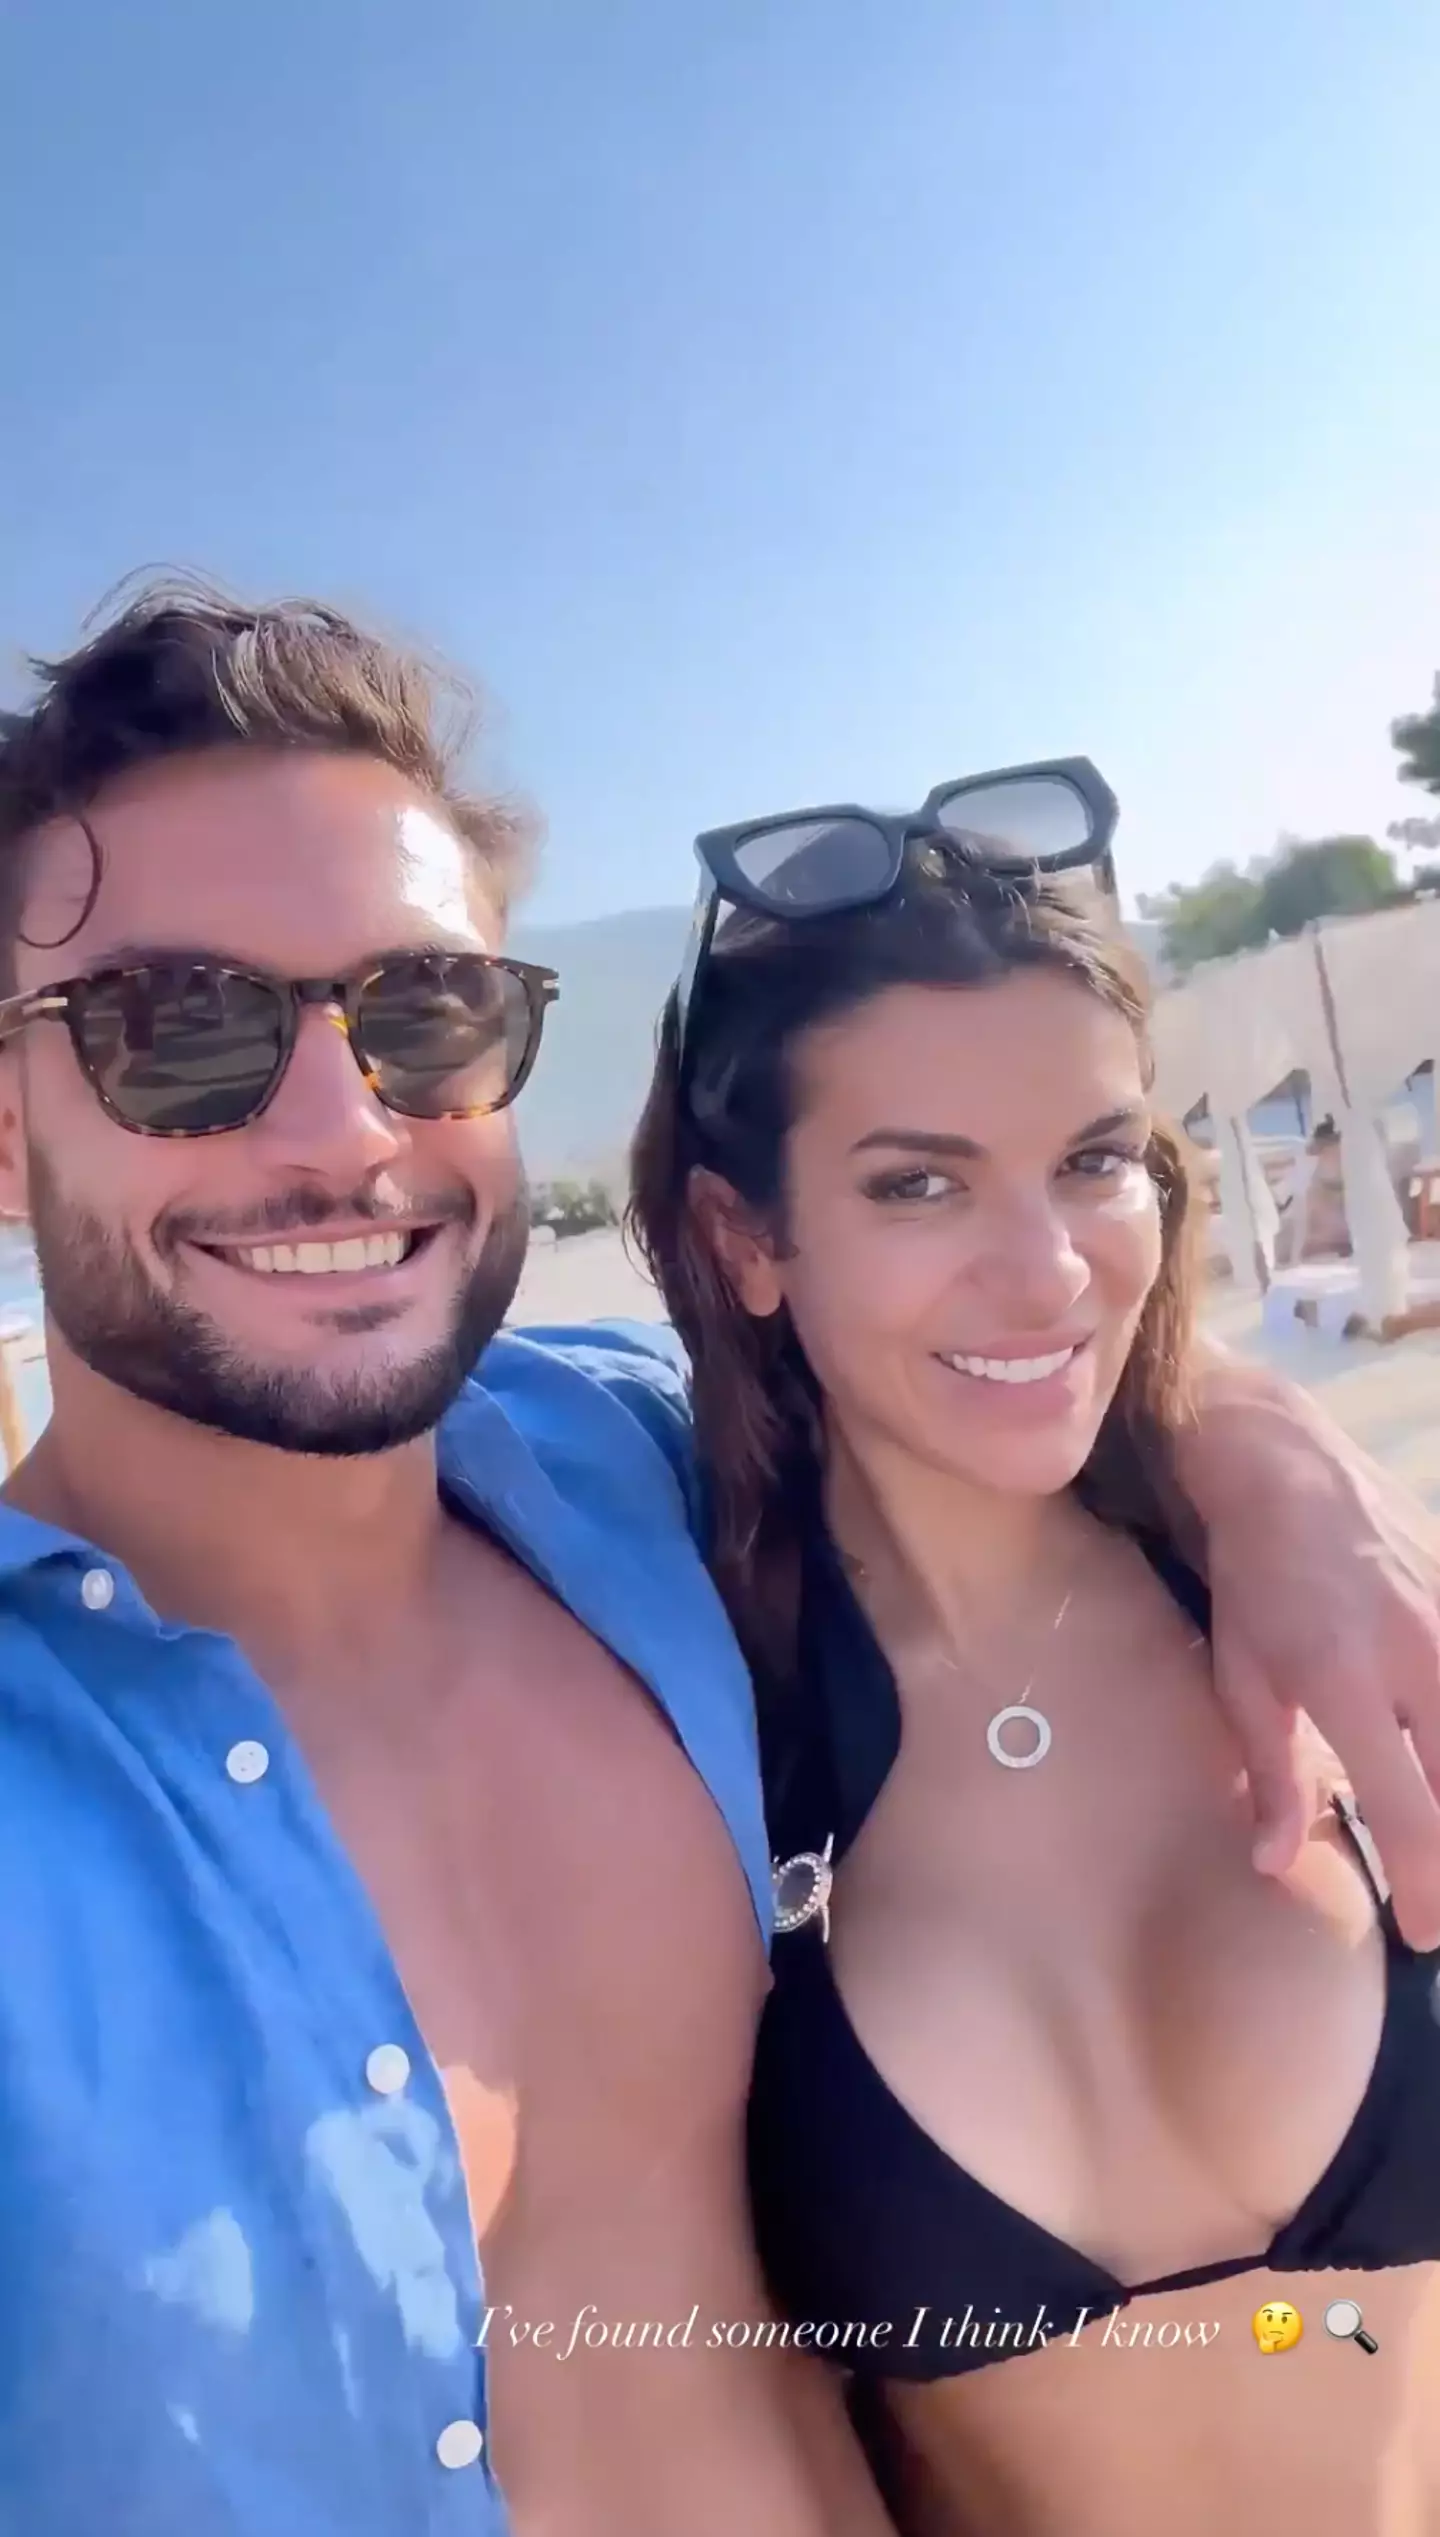 The former Love Island winners are back together.